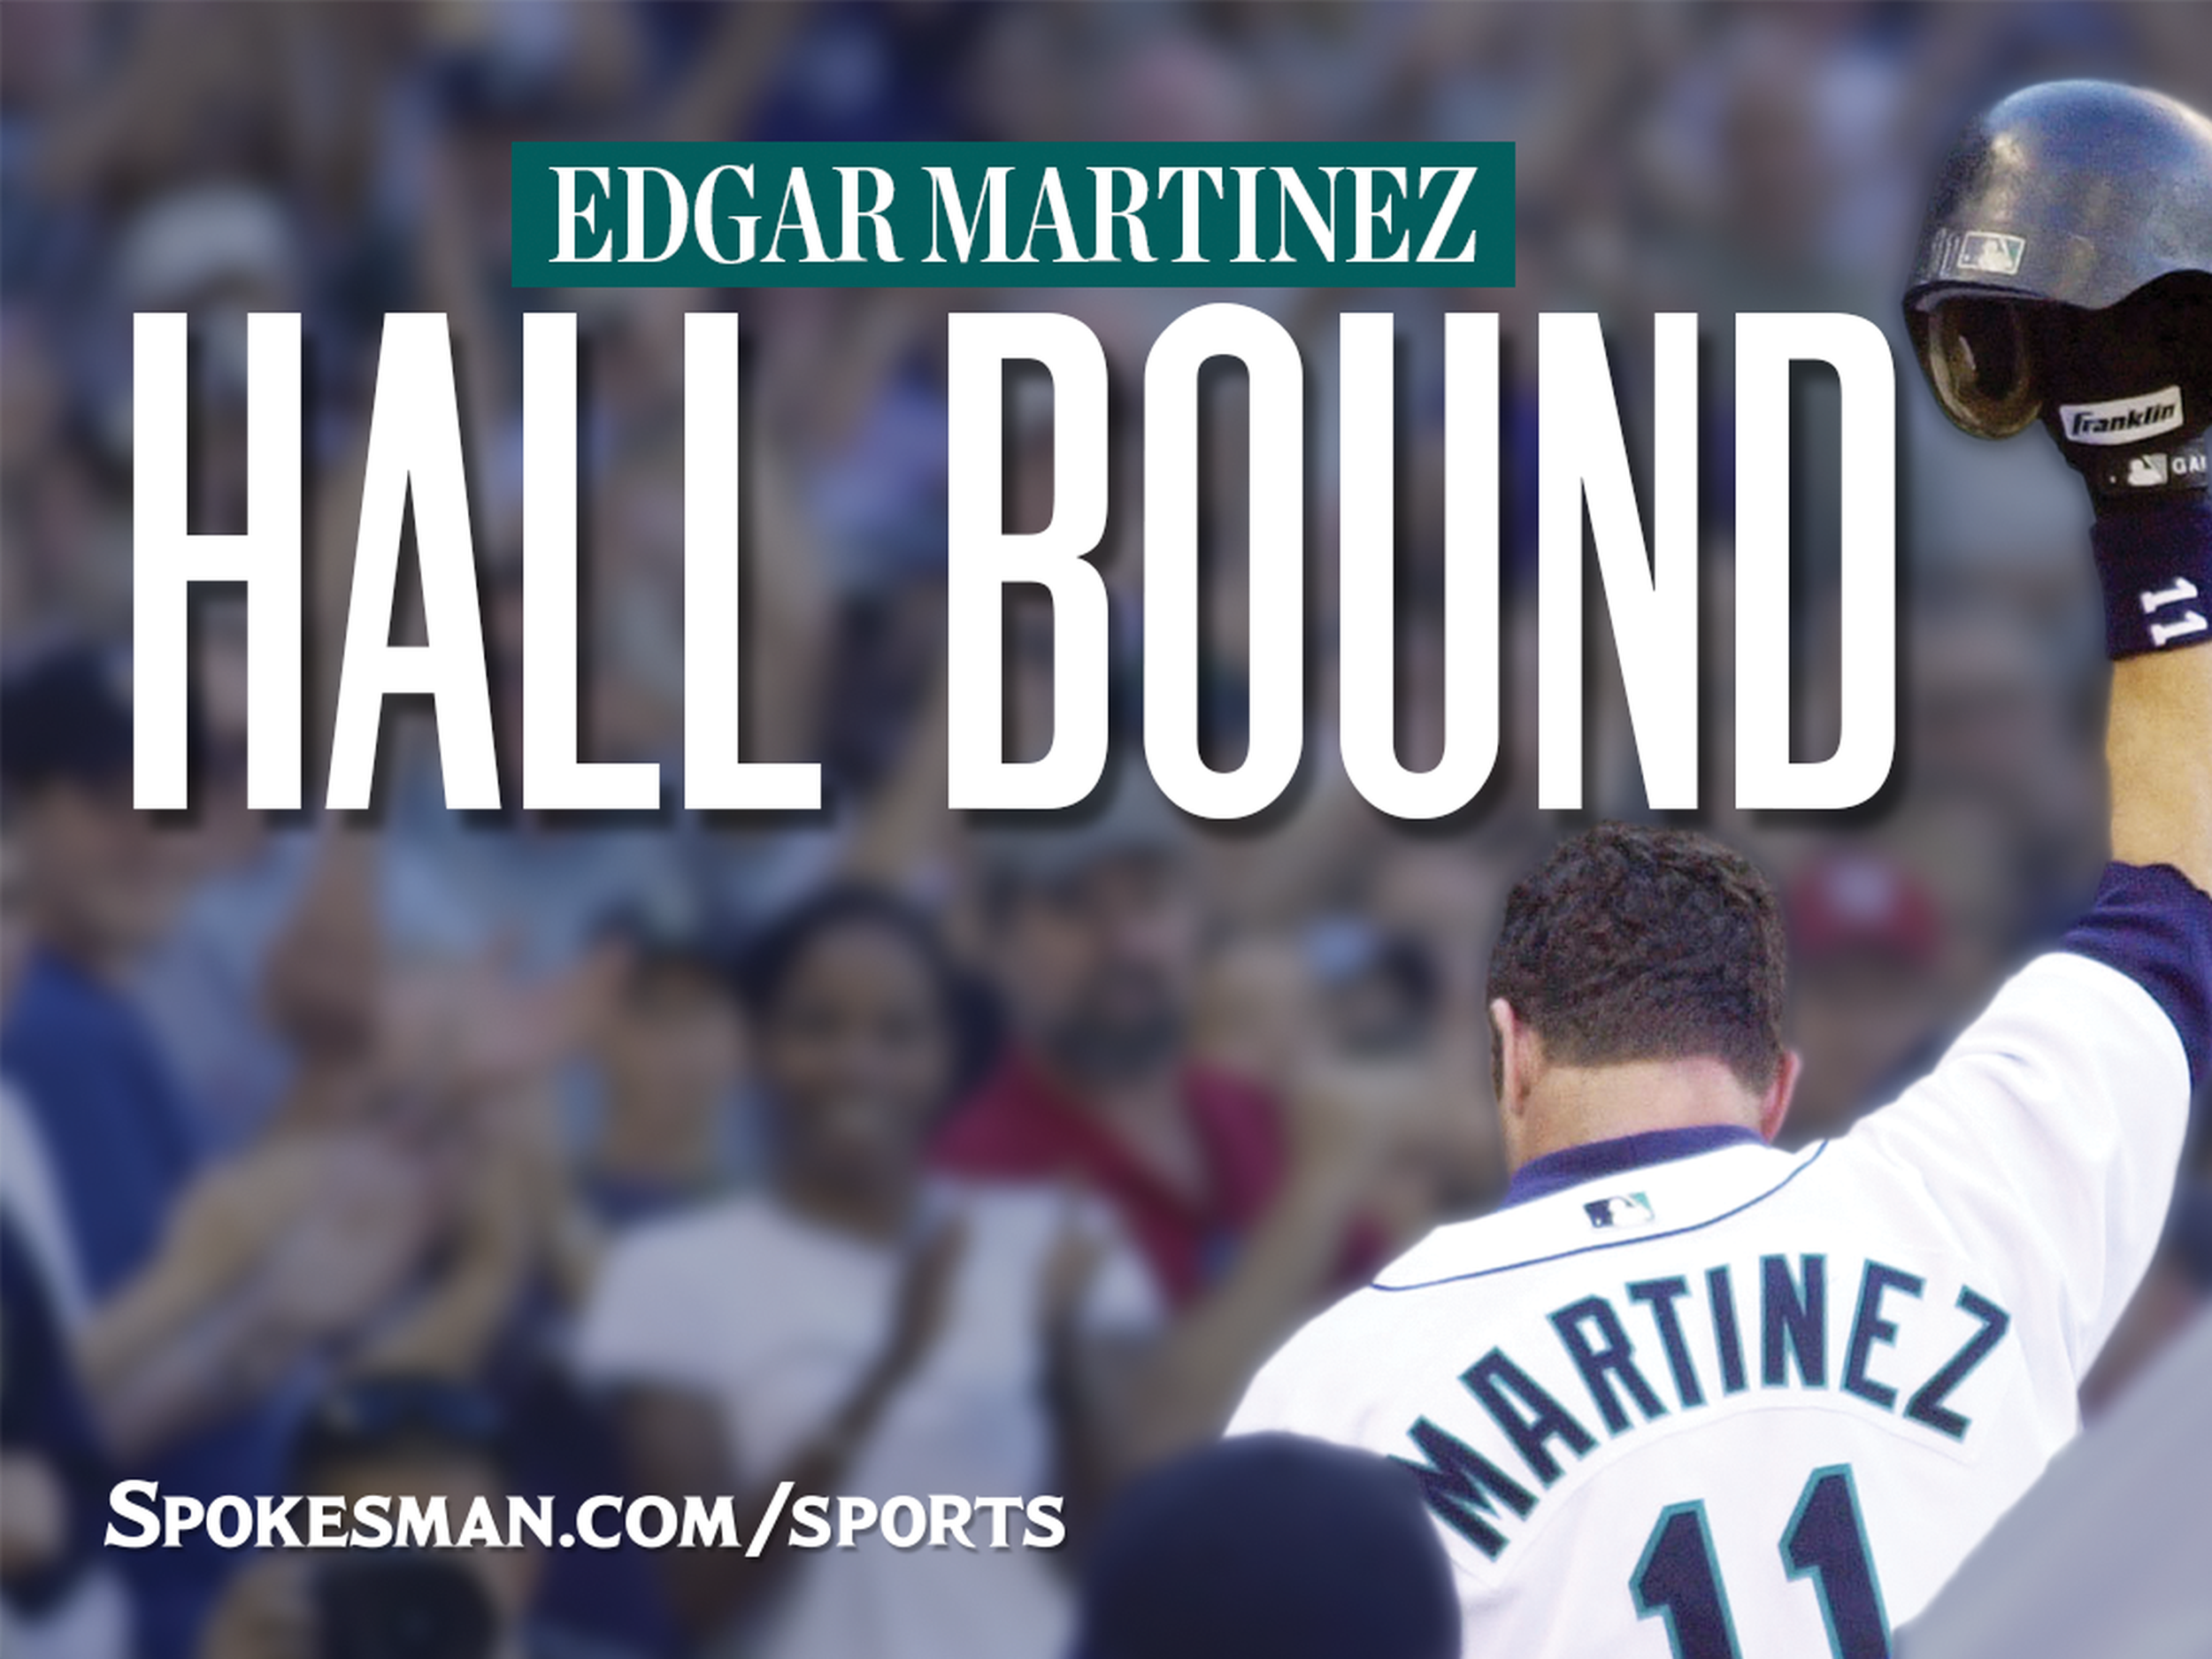 Edgar Martinez's Hall of Fame Candidacy, by Mariners PR